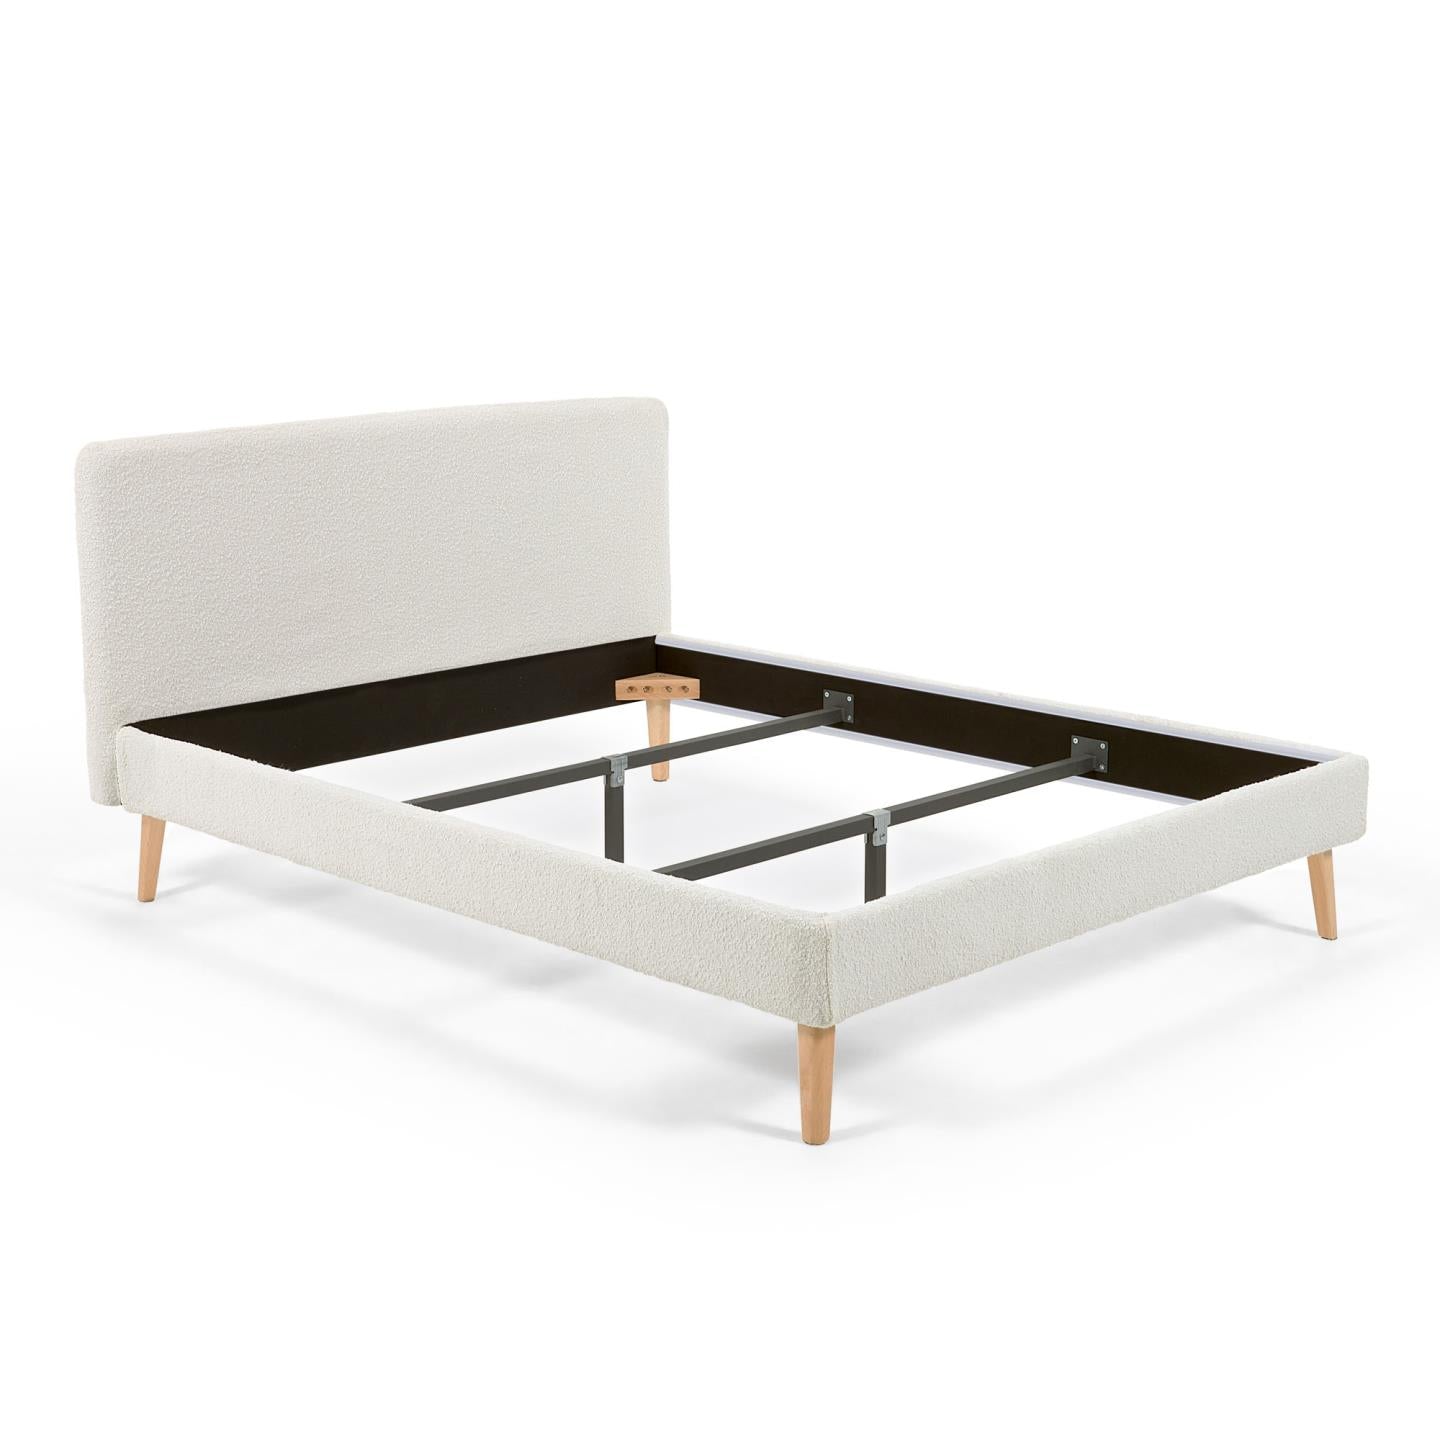 Dyla bed in white fleece, with solid beech wood legs for a 160 x 200 cm mattress